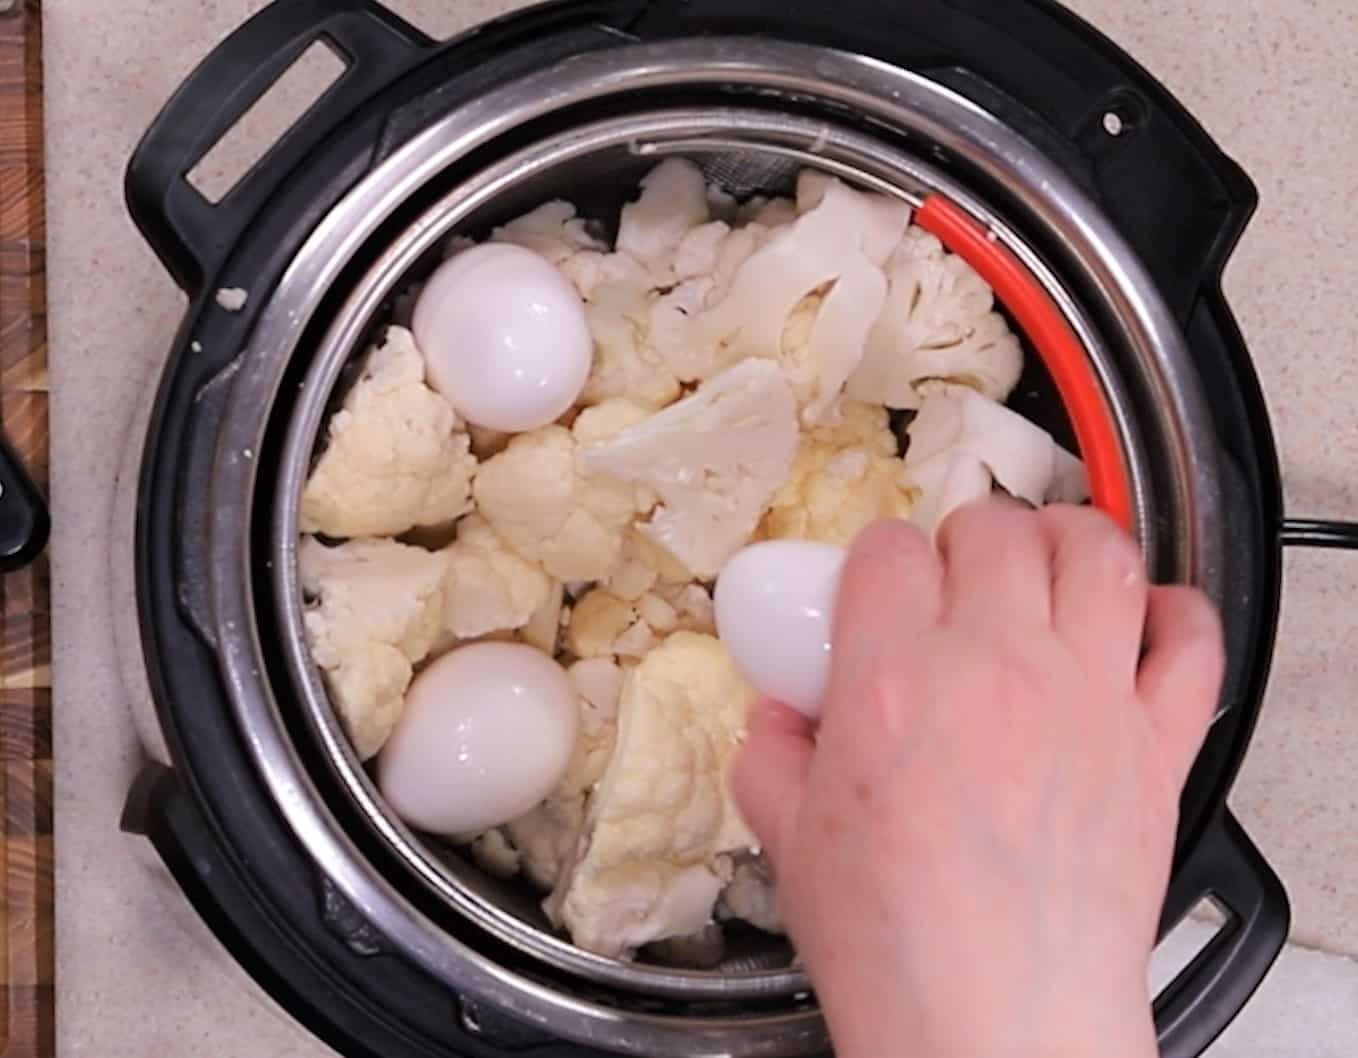 Raw eggs placed on top of cauliflower in basket in Instant Pot